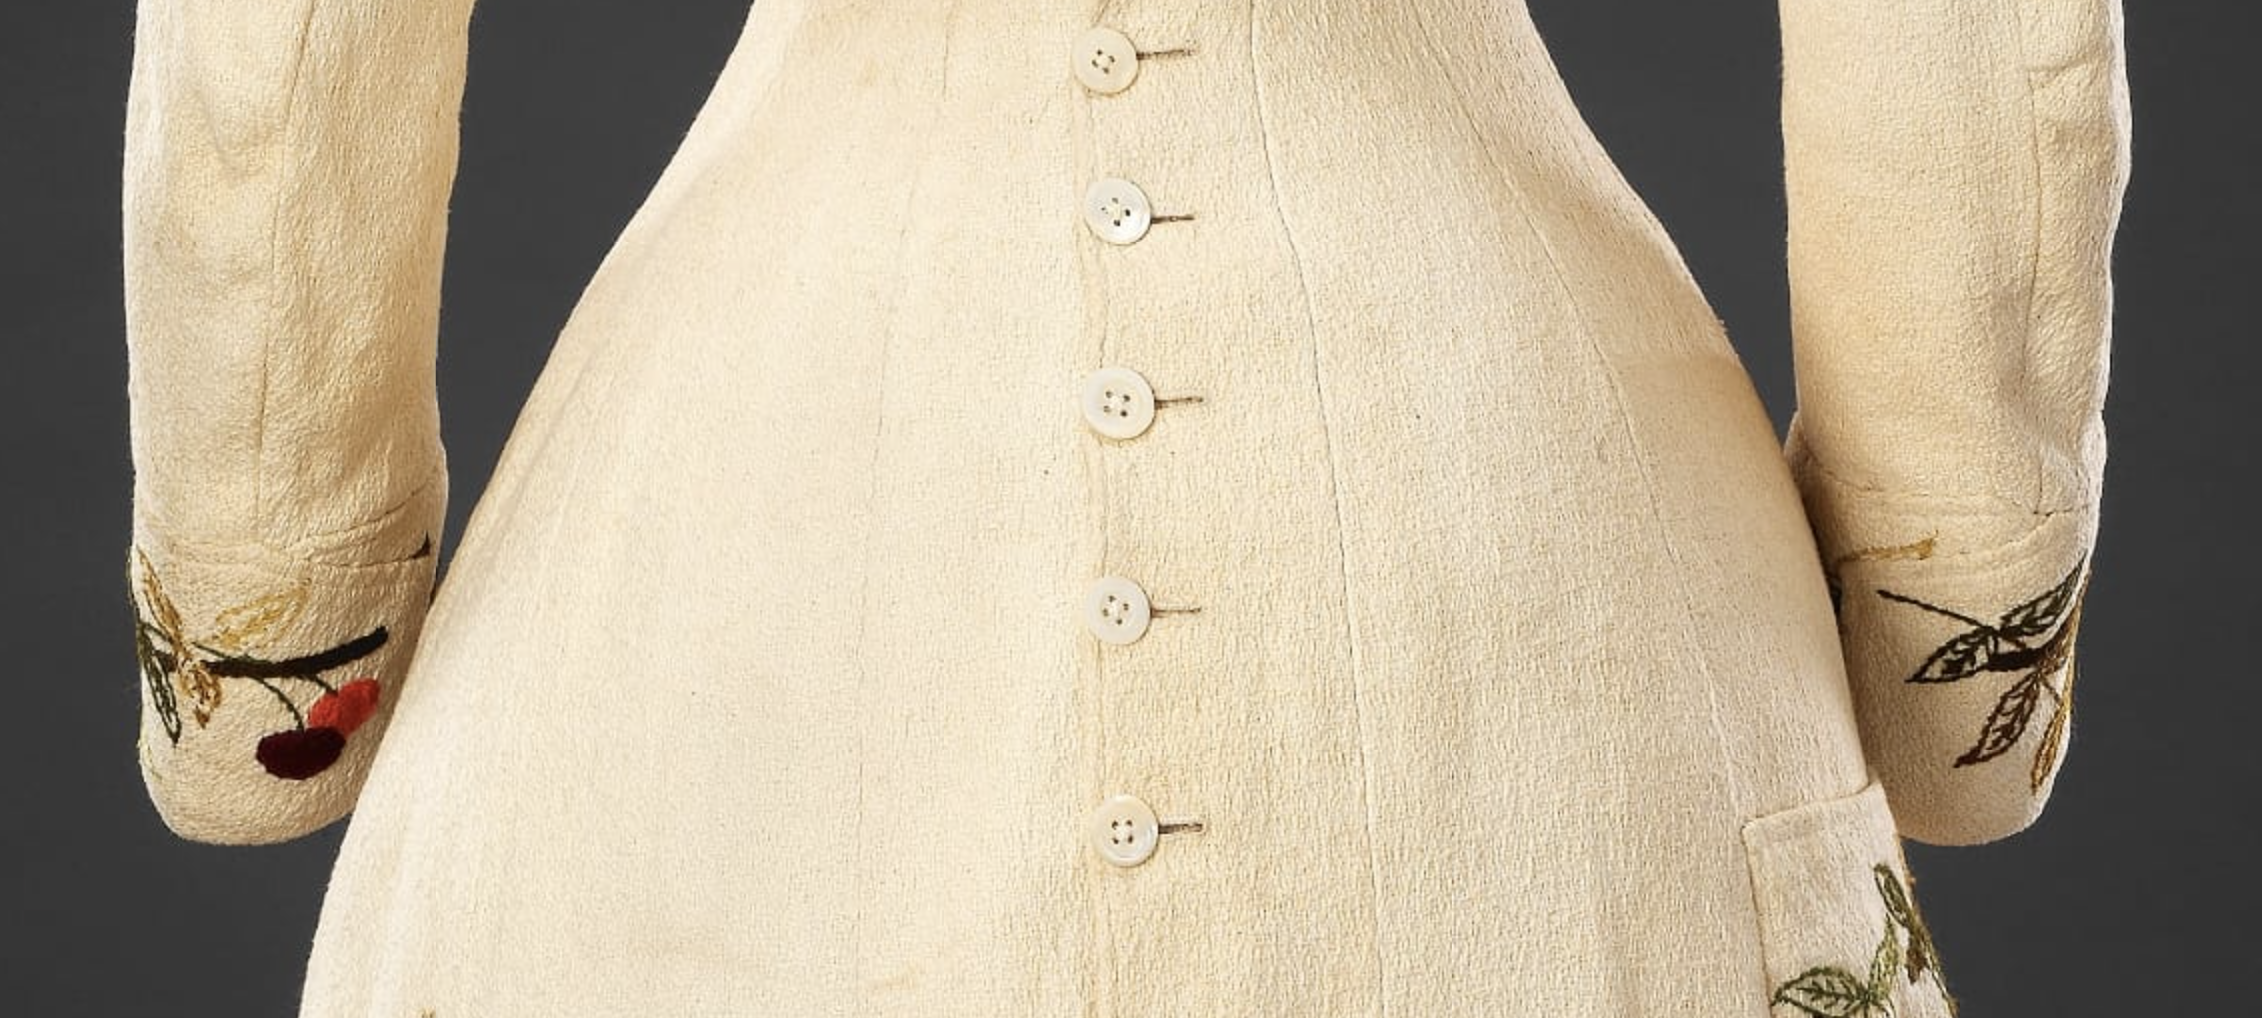 Dress, Circa 1880, Cotton embroidered with wool; mother of pearl buttons, John Bright Collection